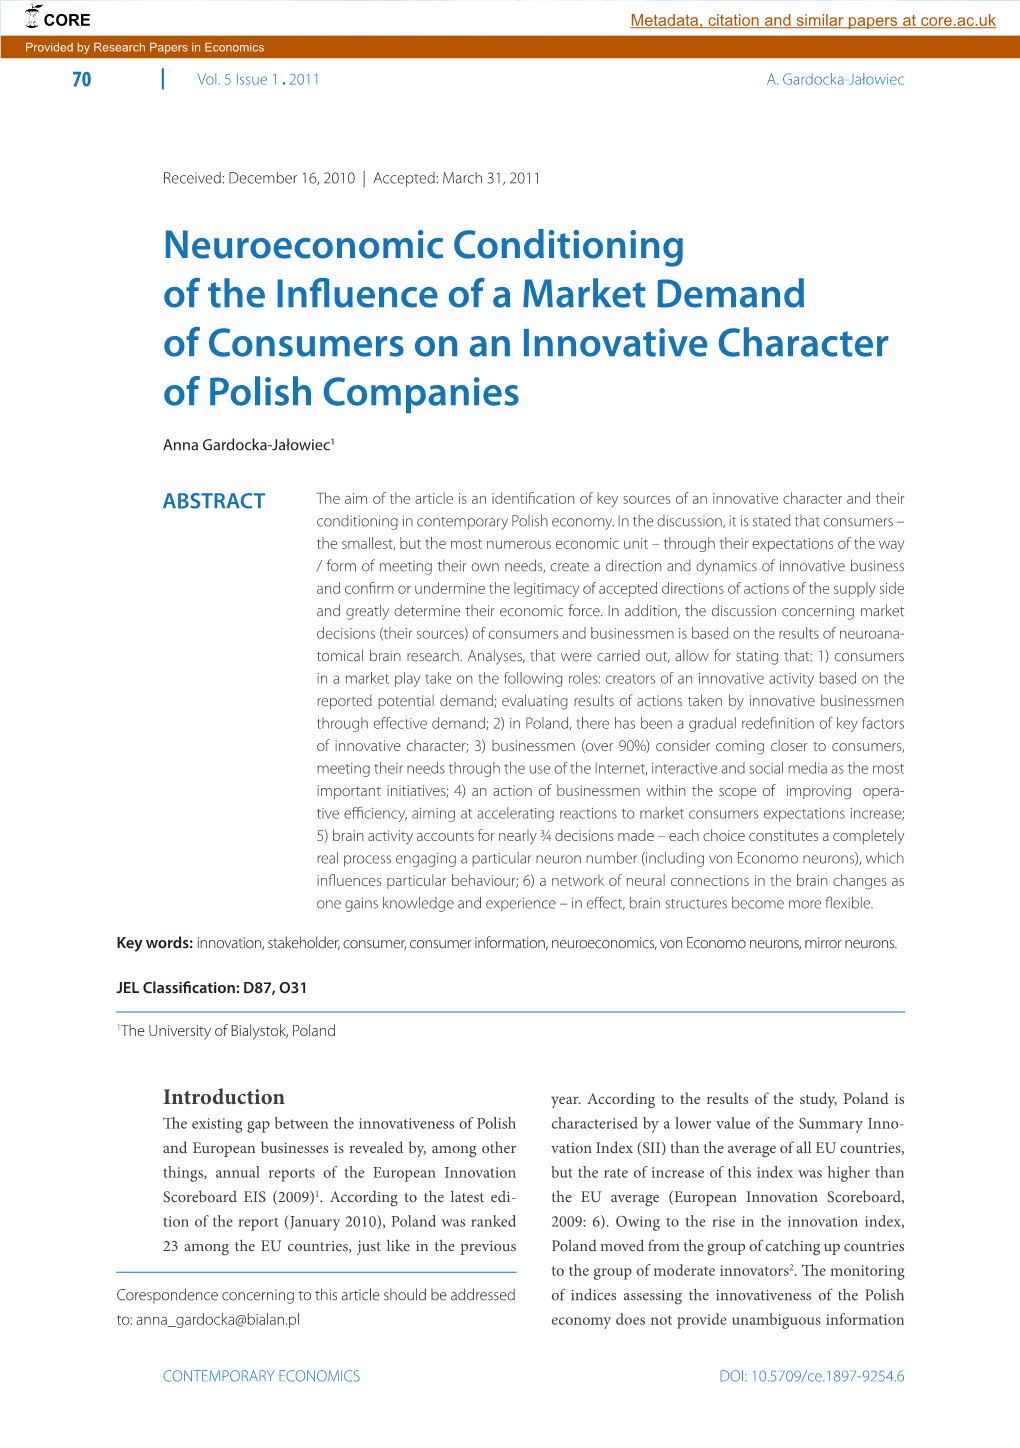 Neuroeconomic Conditioning of the Influence of a Market Demand of Consumers on an Innovative Character of Polish Companies